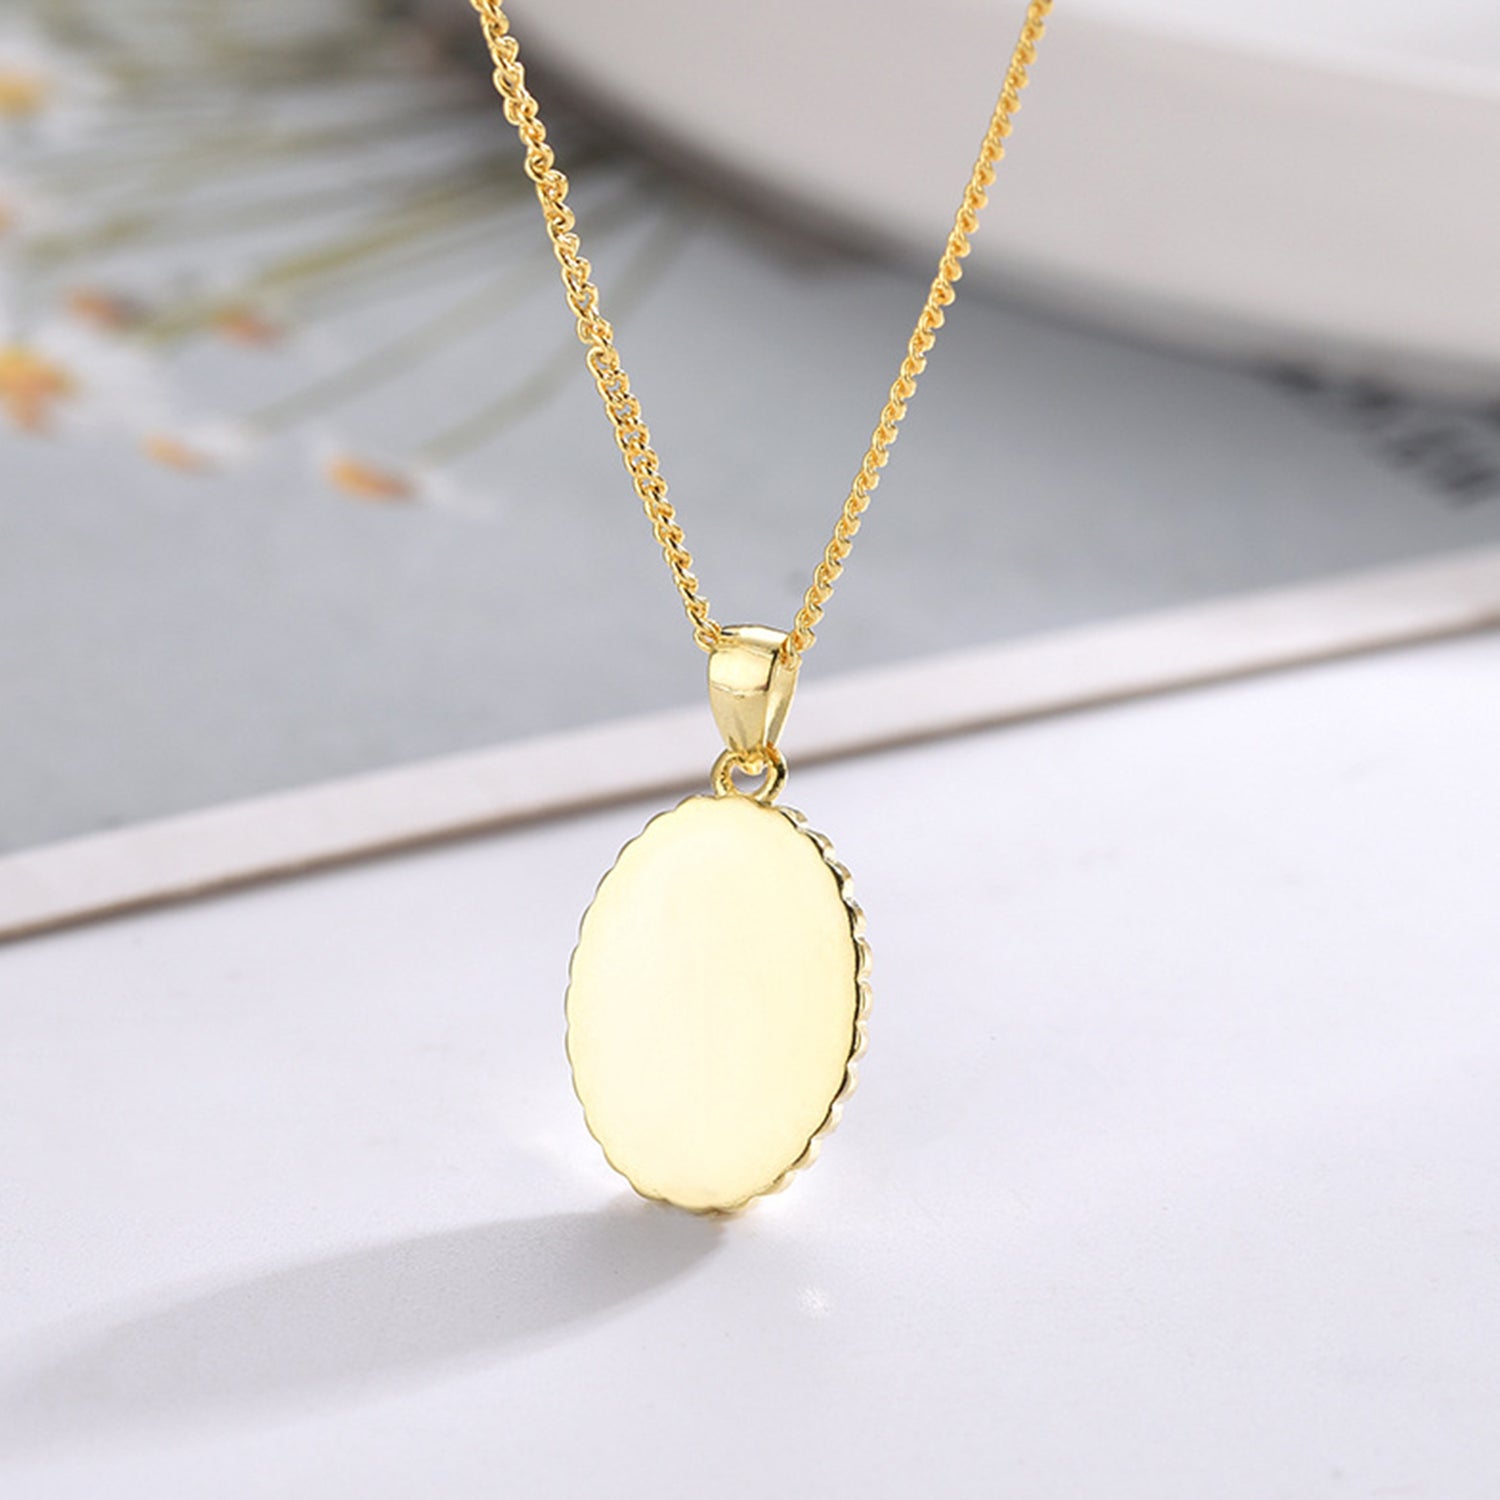 Luxurious Oval Seashell Necklace